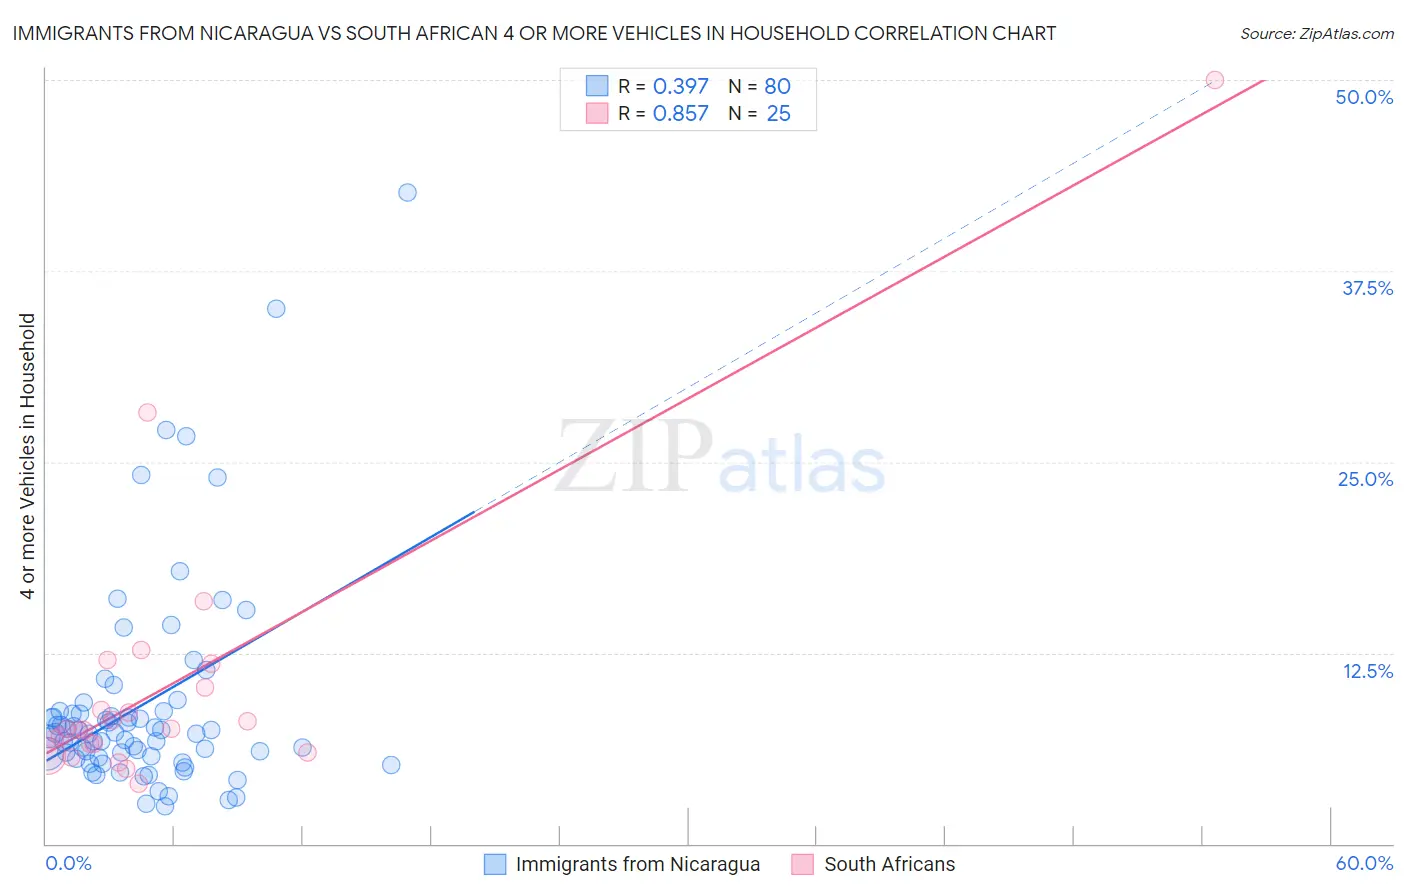 Immigrants from Nicaragua vs South African 4 or more Vehicles in Household